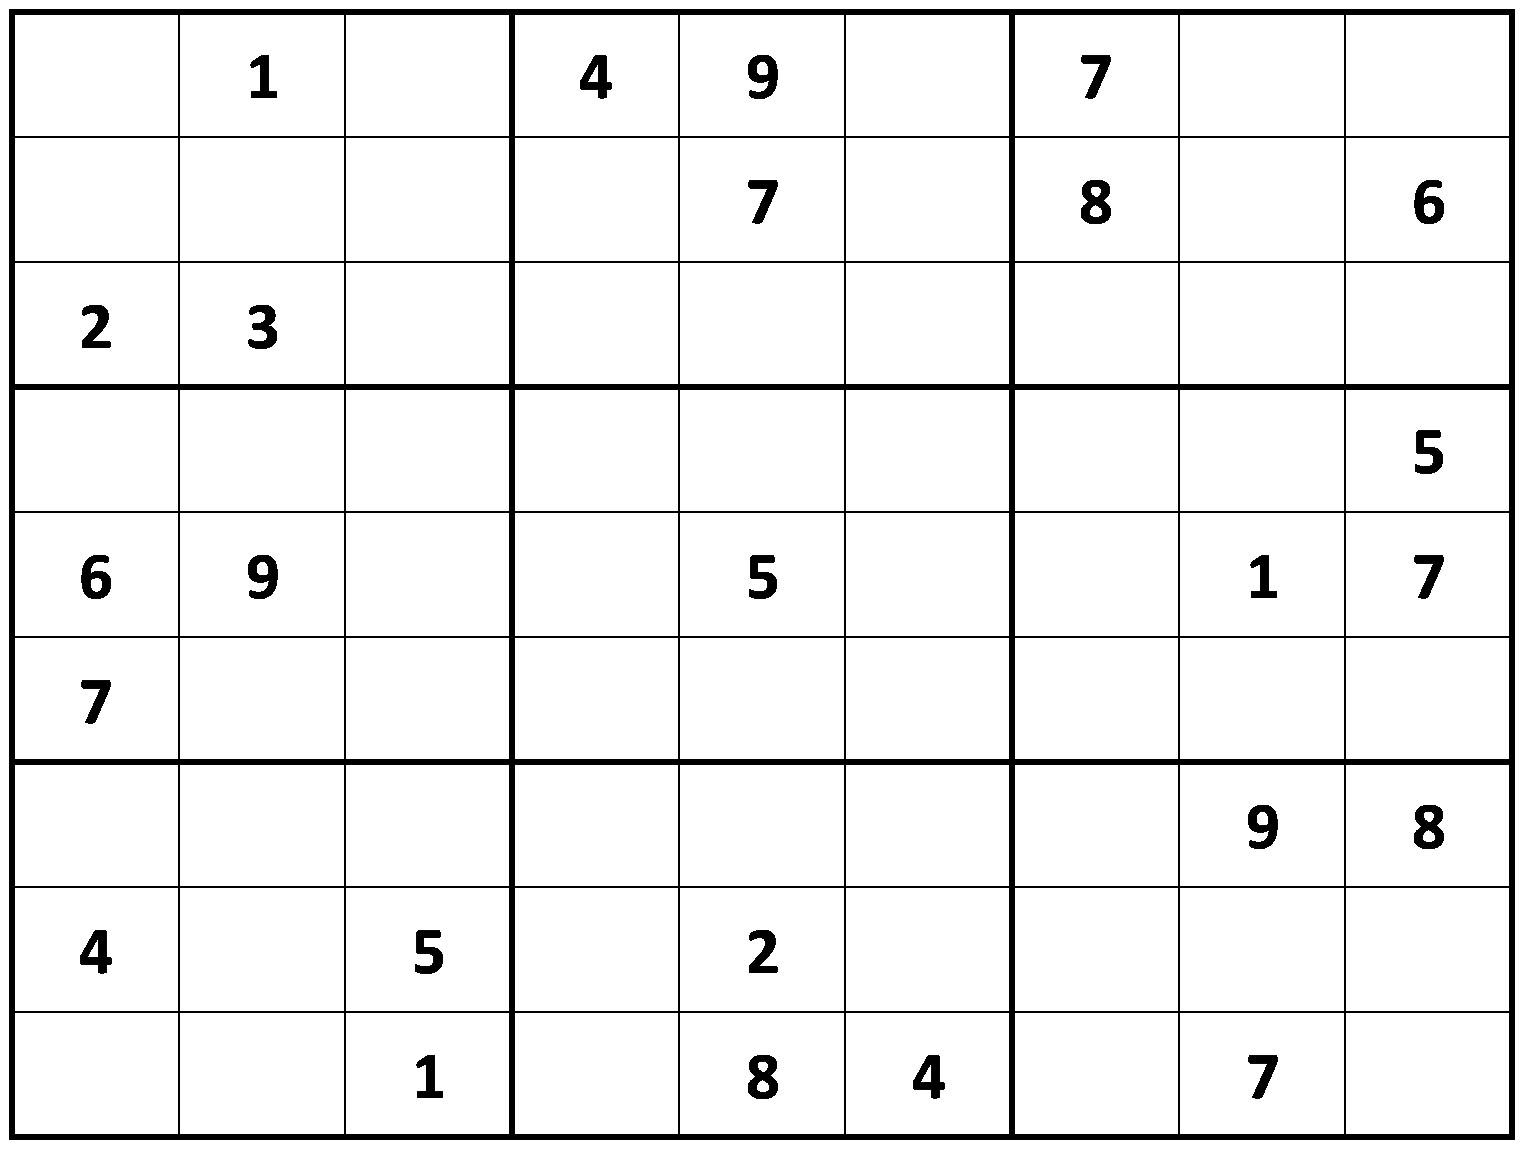 About &amp;#039;free Printable Sudoku&amp;#039;|Printable Sudoku ~ Tory Kost&amp;#039;s Blog - Download Printable Sudoku Puzzles Free